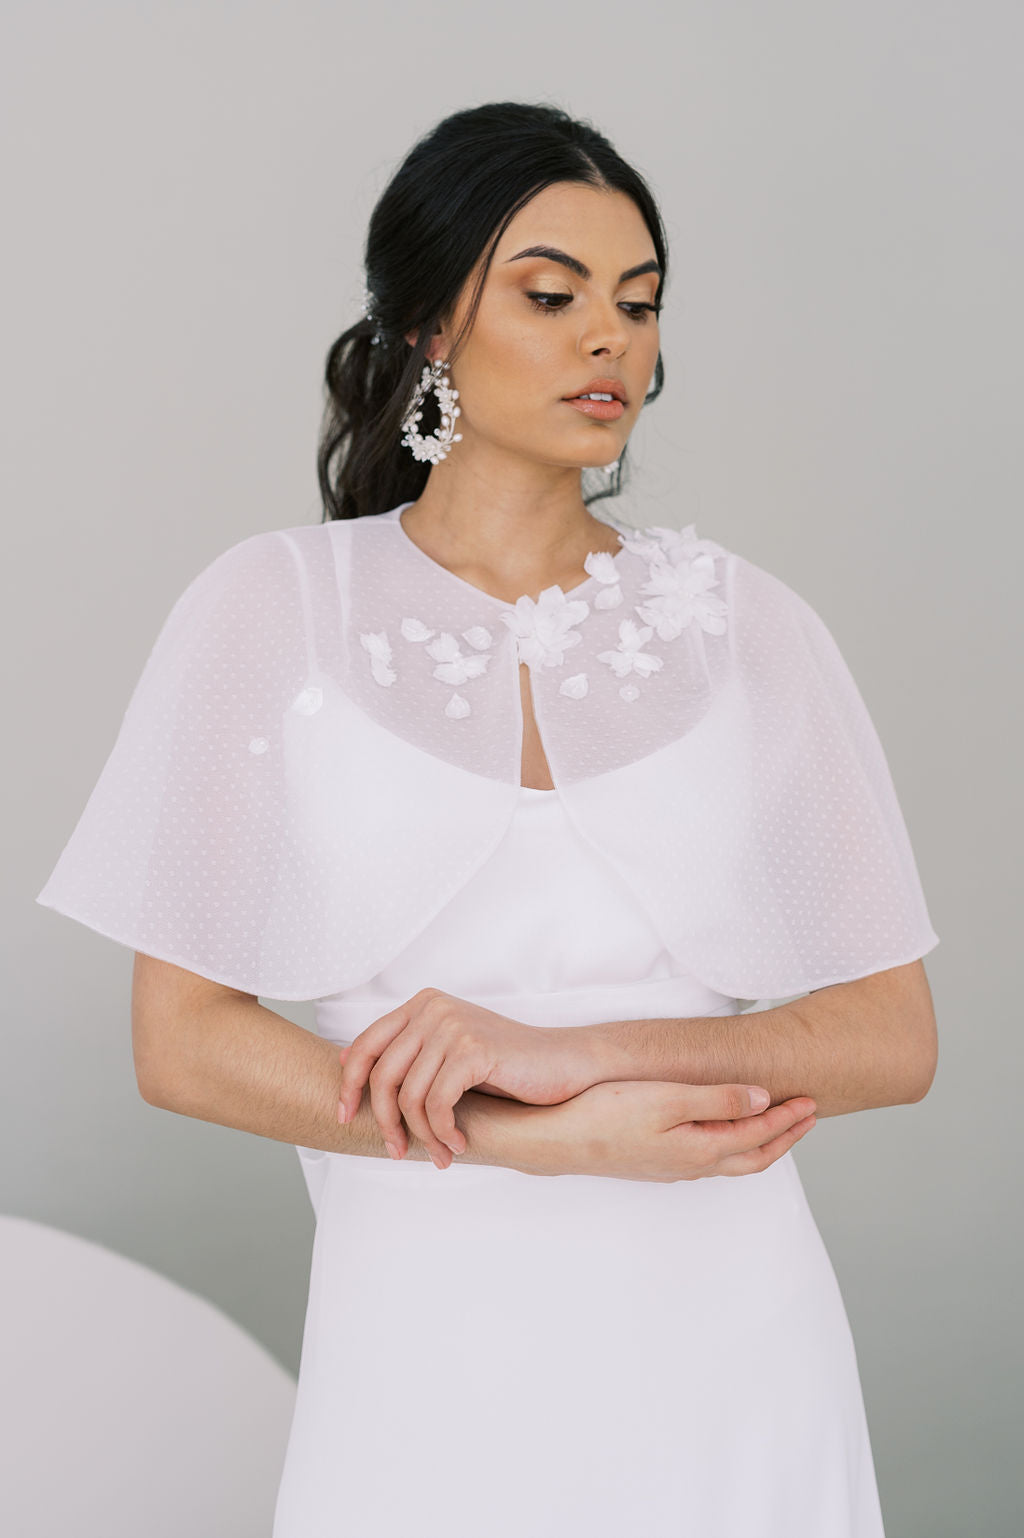 Short bridal capelet. Handmade by Catherine Langlois, Toronto